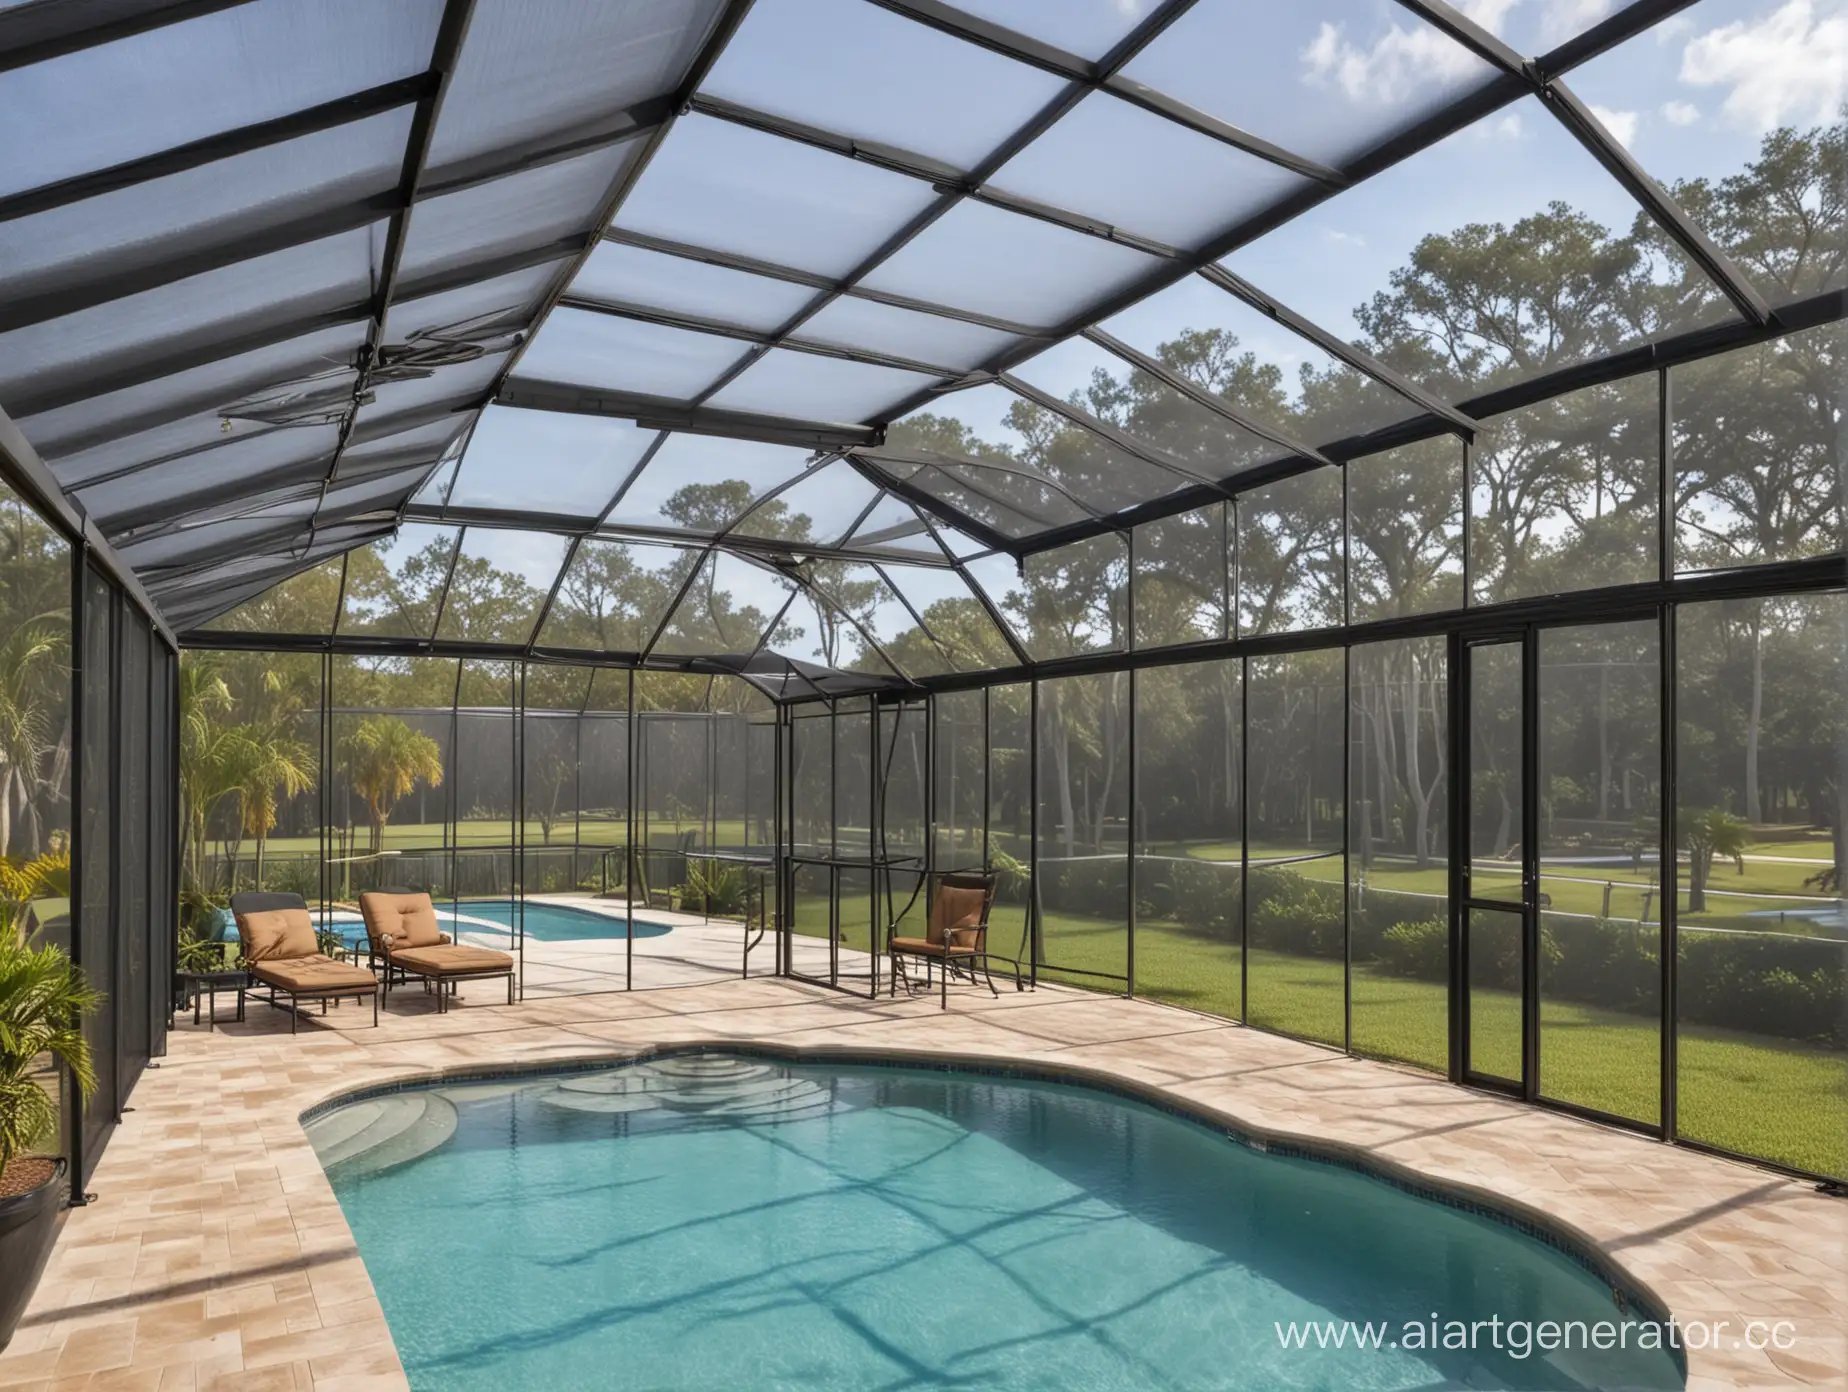 Florida-American-House-with-Screen-Porch-and-Pool-Cage